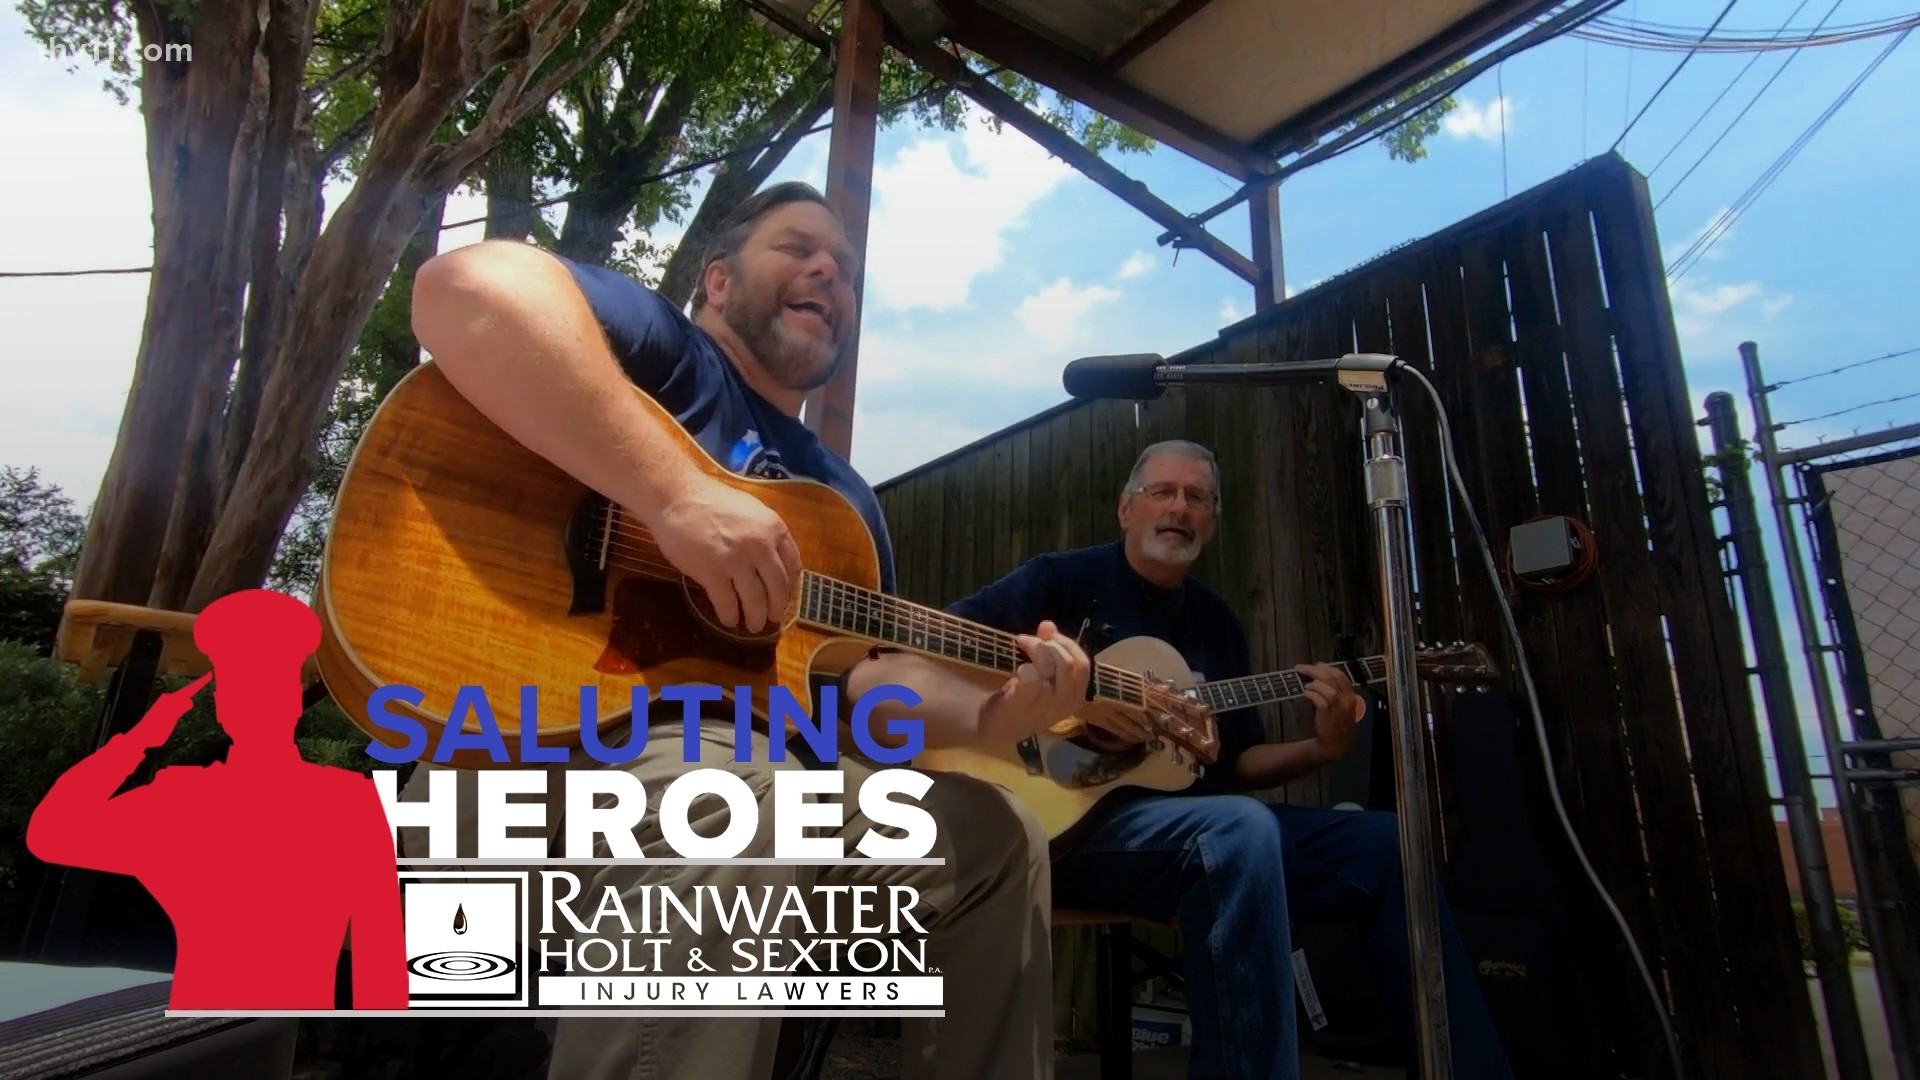 Freedom Sings Arkansas pairs musicians with veterans, providing them with an outlet to process troubling times as it's turned into recorded songs.